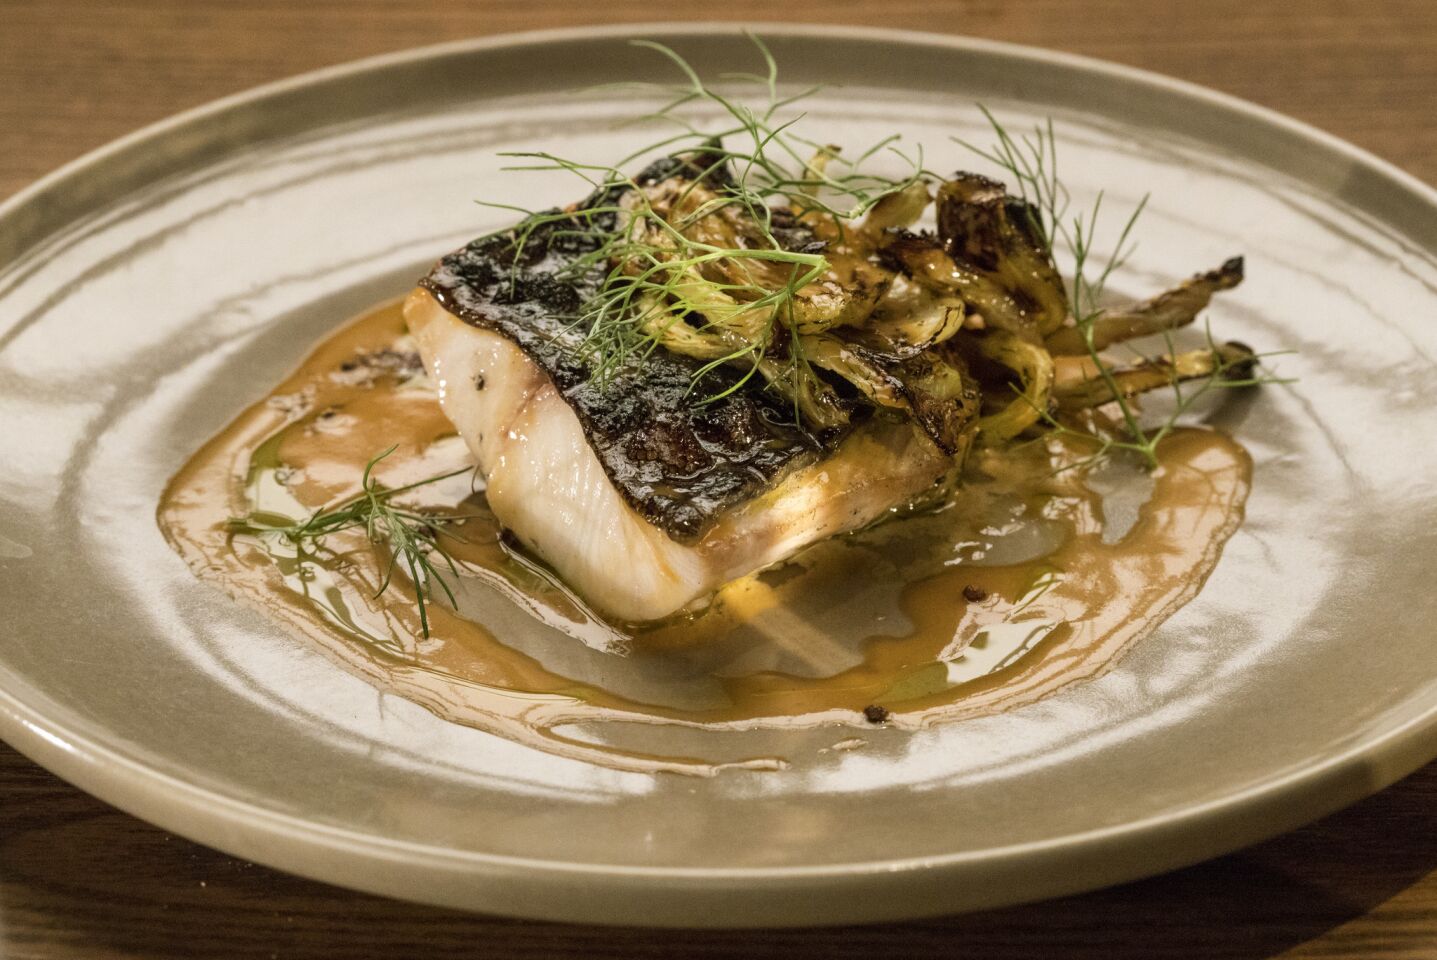 Jonathan Gold reviews the Hearth & Hound